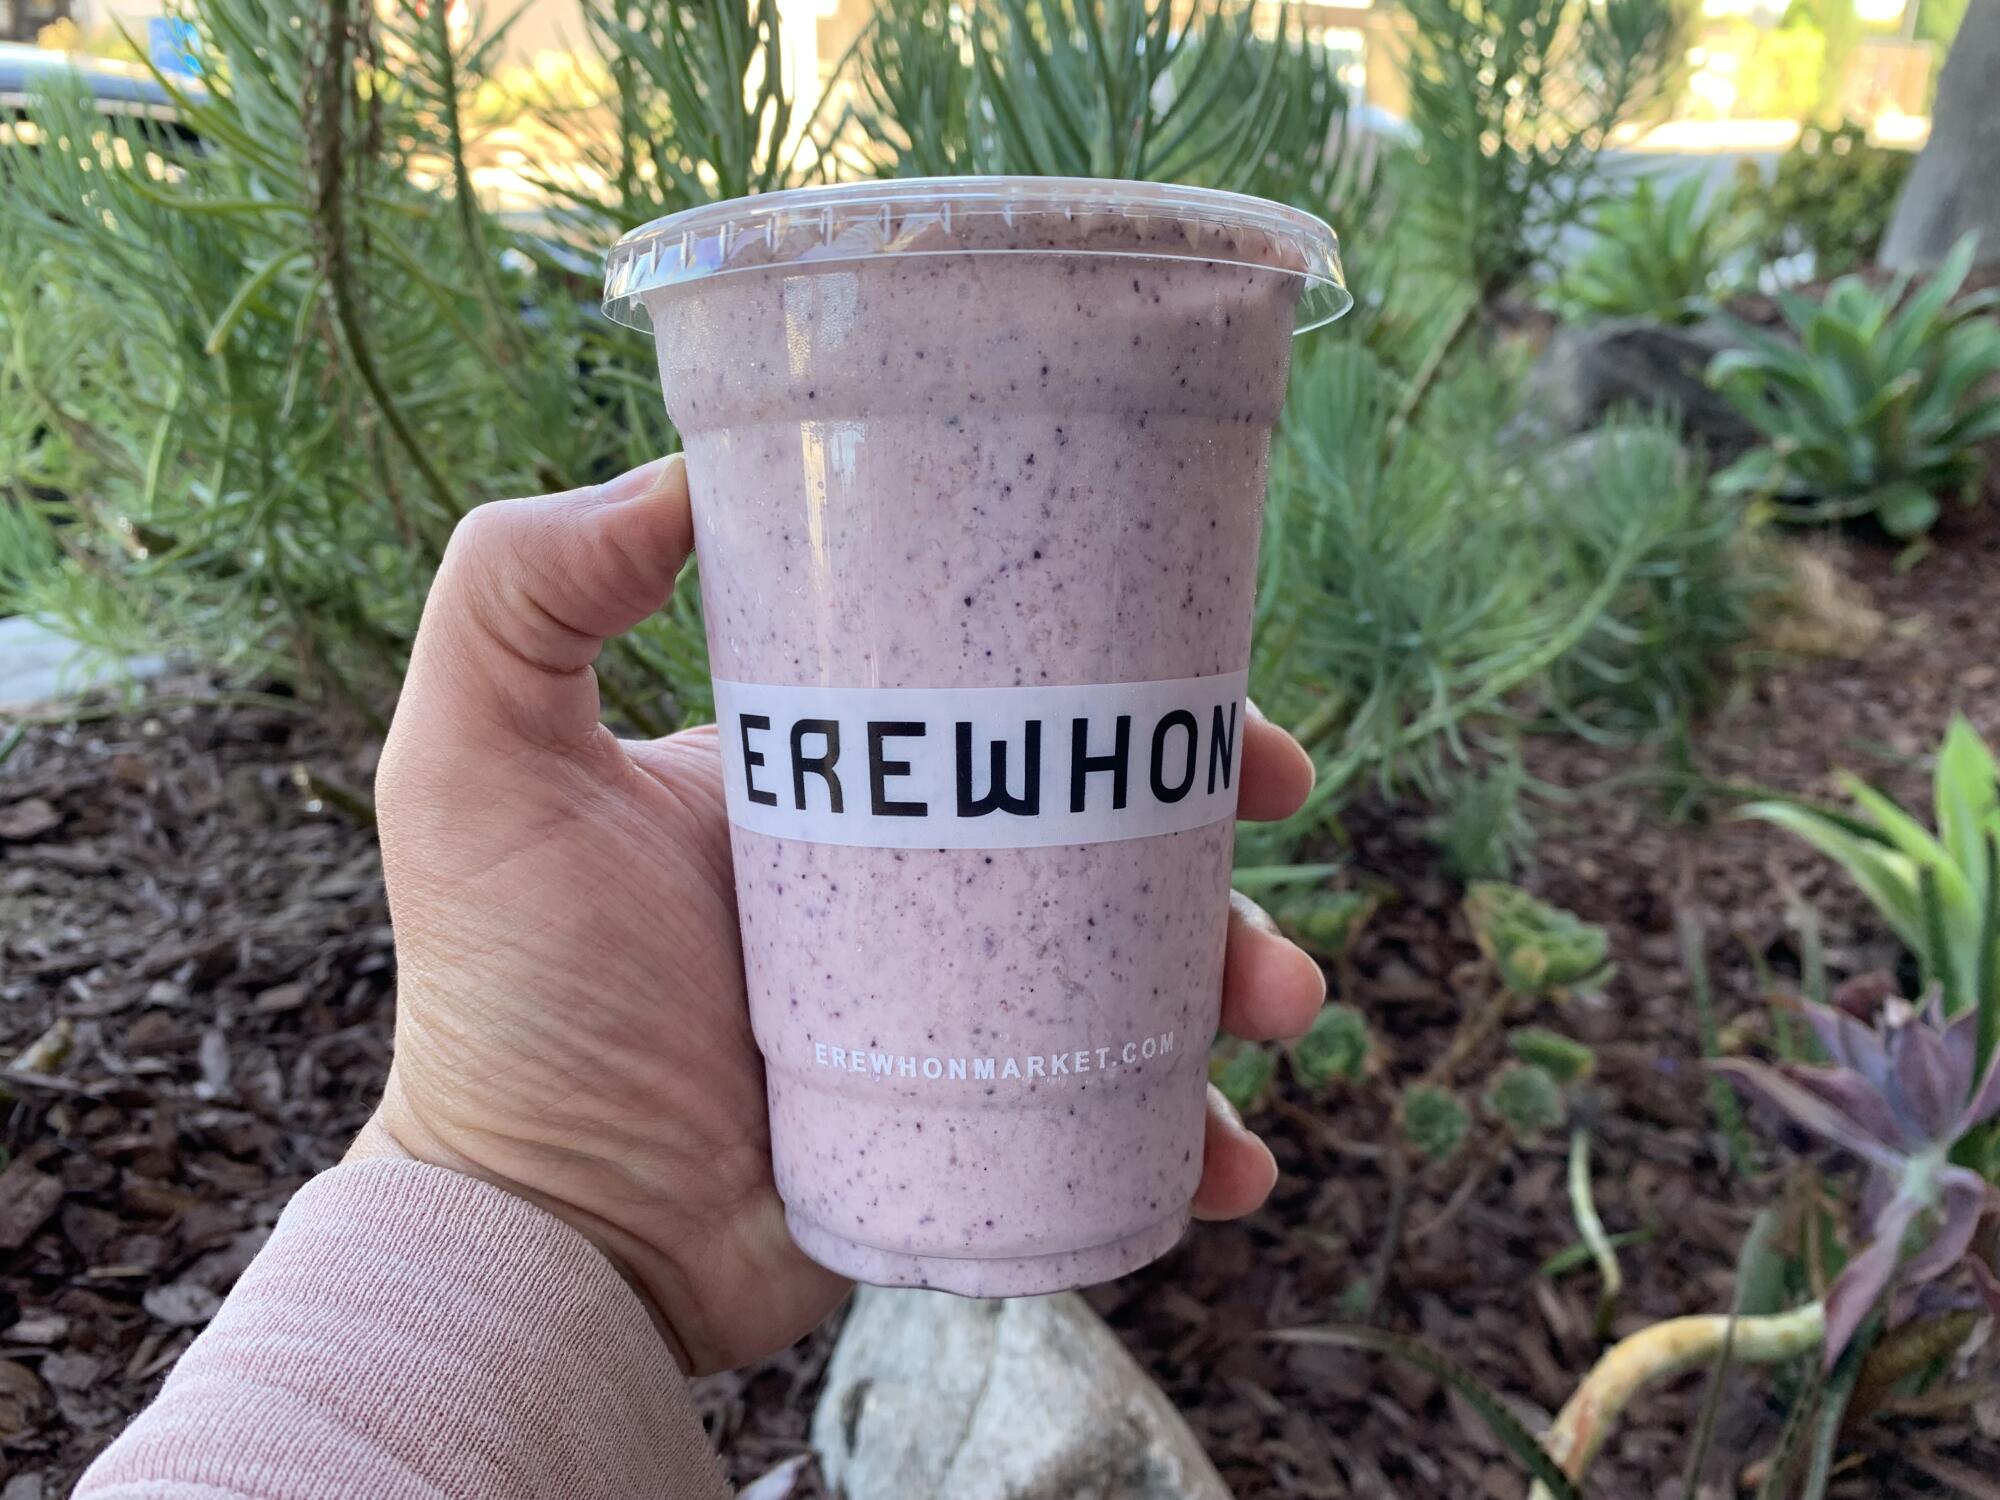 A hand holds a purple smoothie in a plastic cup that says Erewhon.